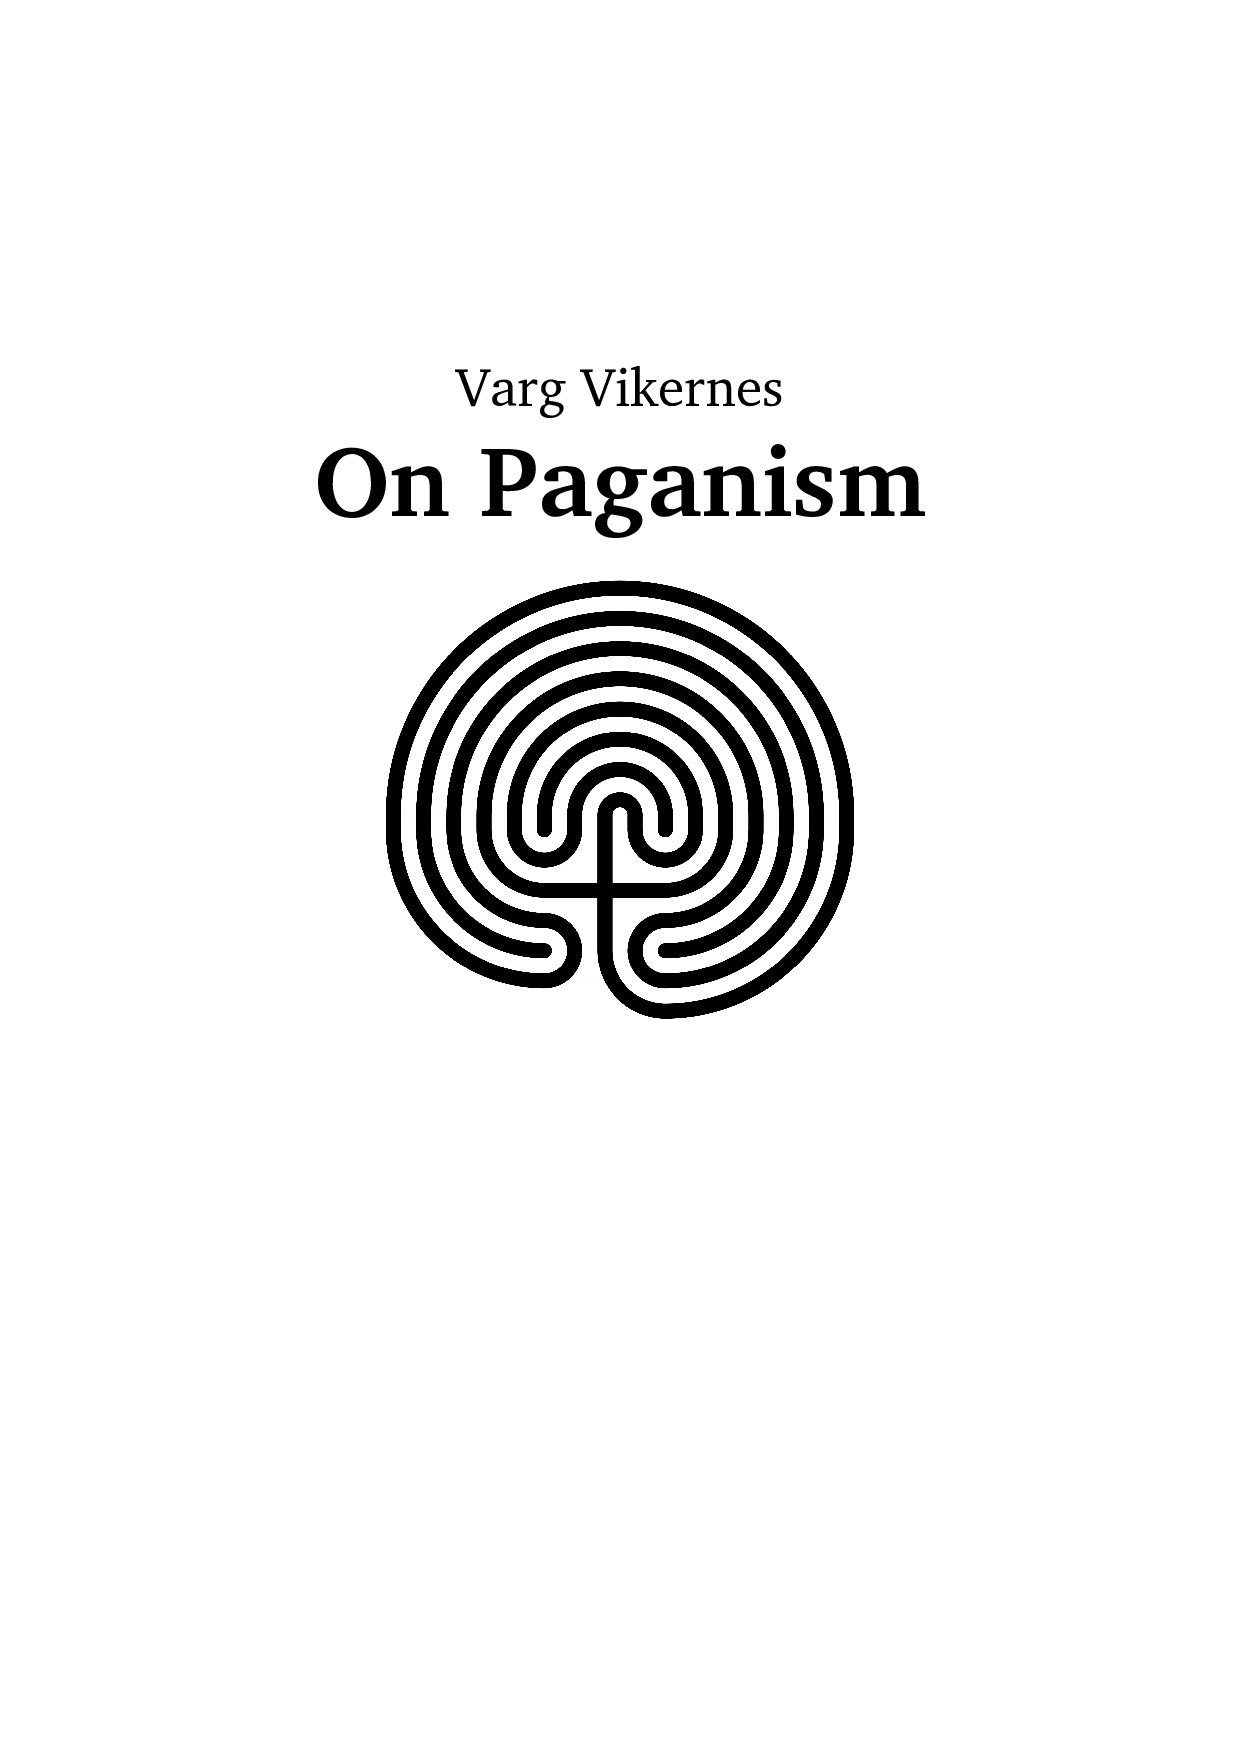 On Paganism